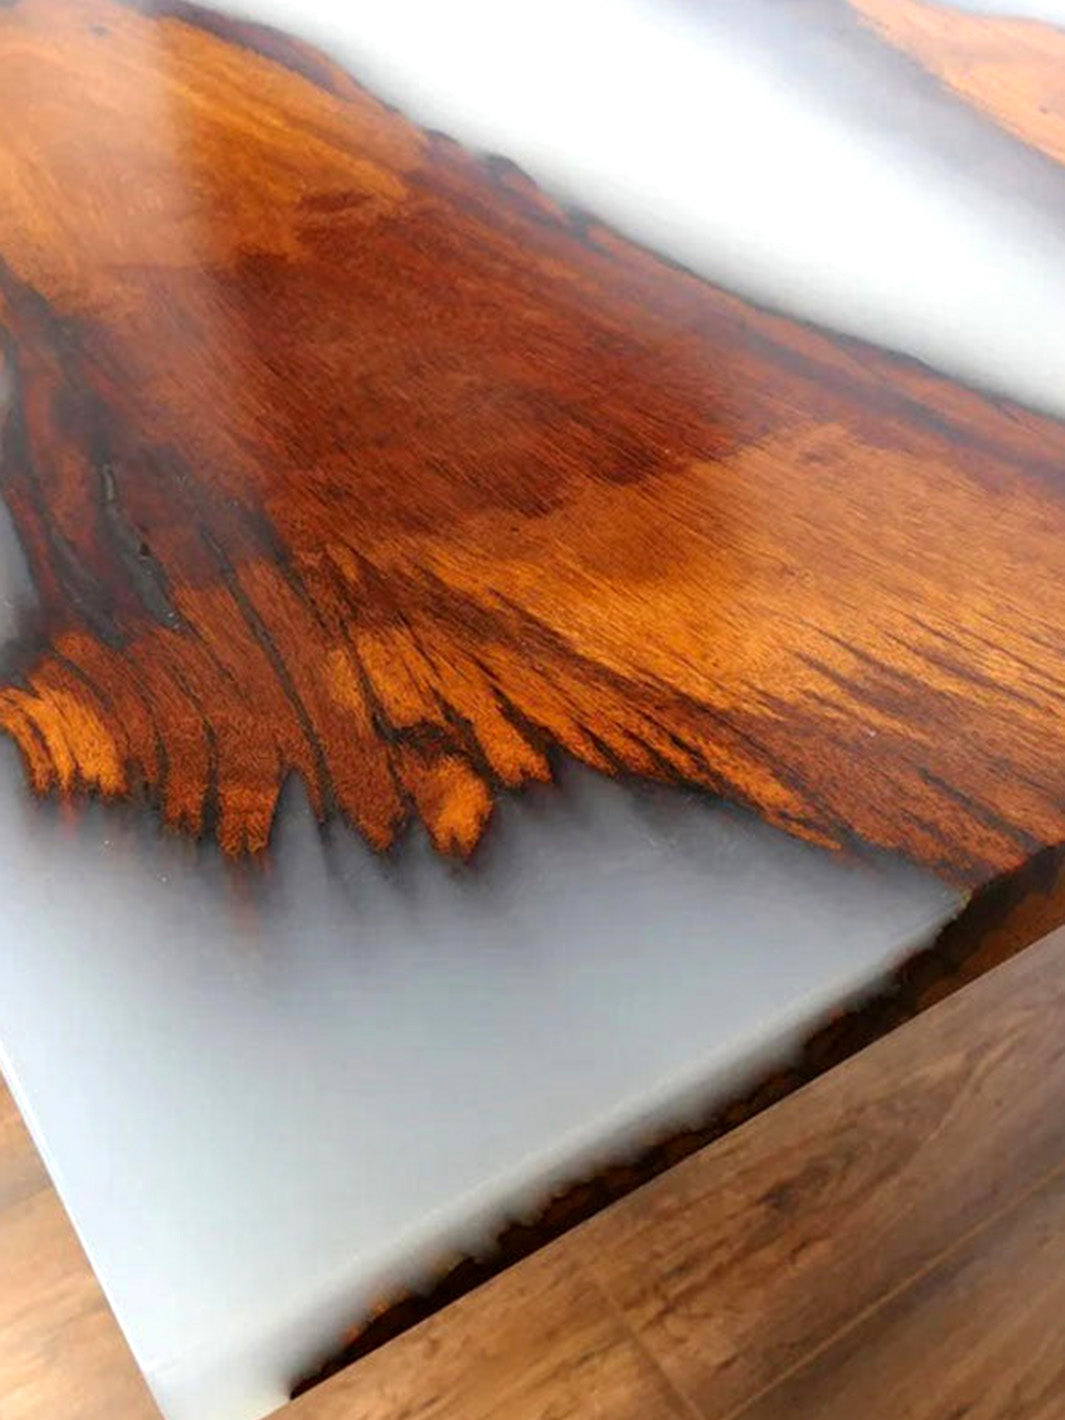 Handcrafted Rosewood Slab Epoxy Resin Wooden Dining Table | 170x70cm Made 4 Decor Tables MDR0002-9